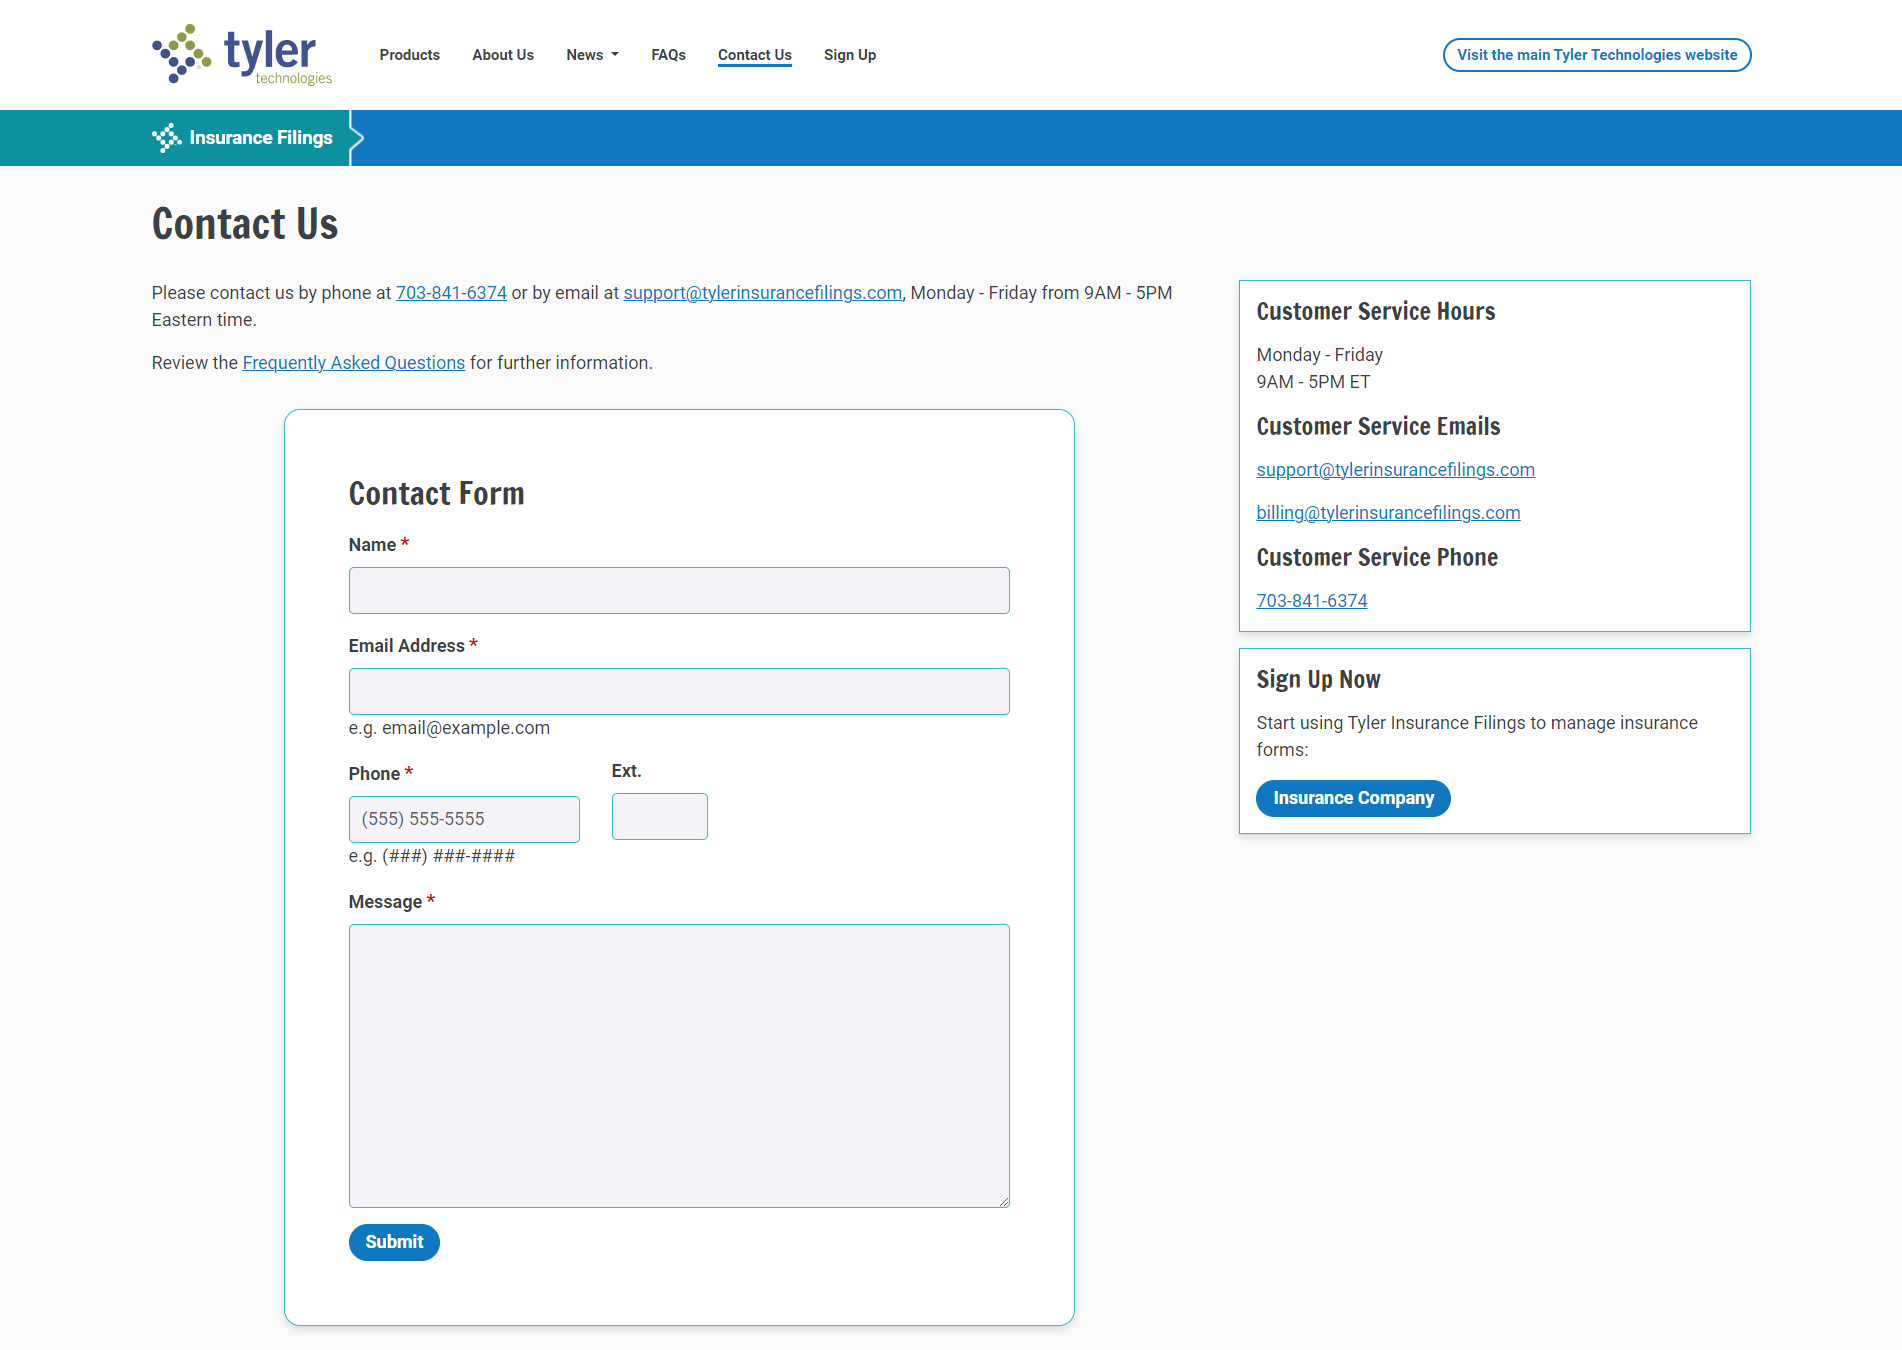 The Contact Us page offers a form that visitors can use to connect with our customer support team.